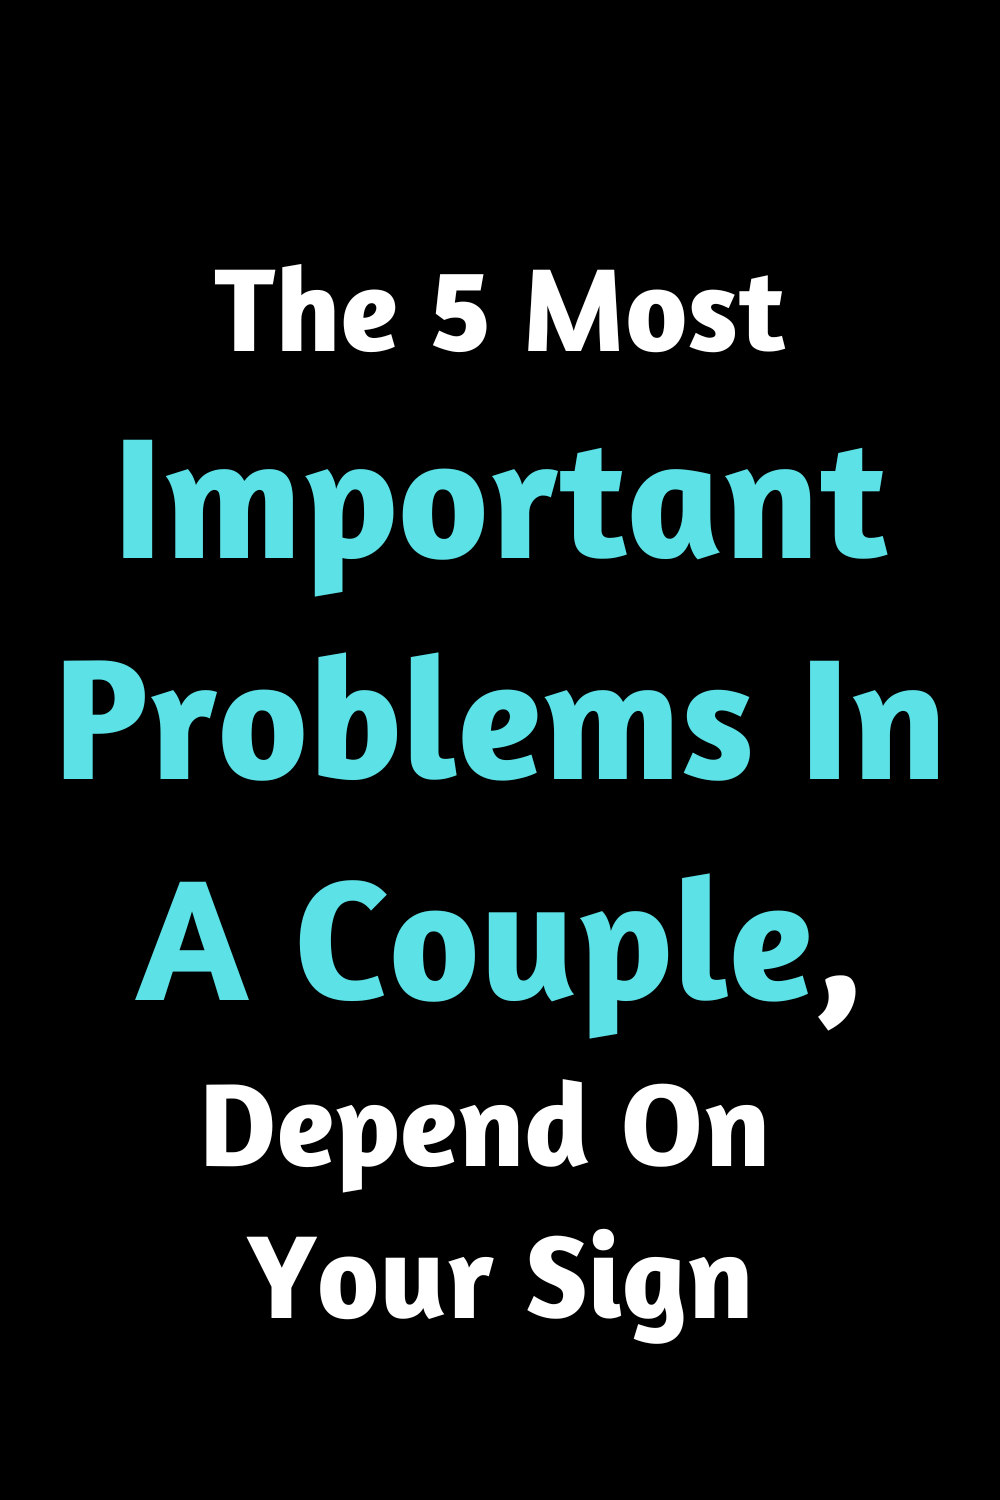 The 5 Most Important Problems In A Couple, Depend On Your Sign